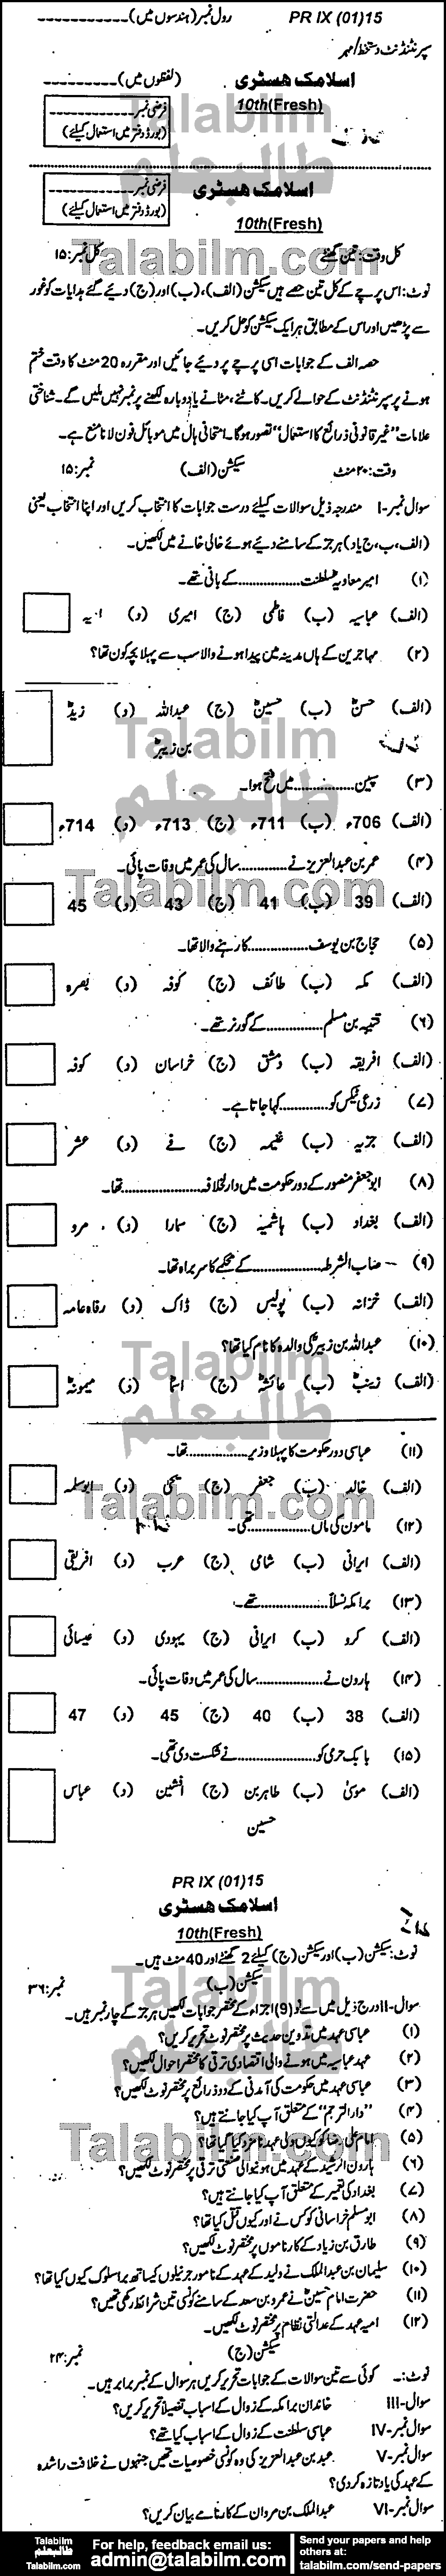 Health And Physical Education 0 past paper for Urdu Medium 2015 Group-I